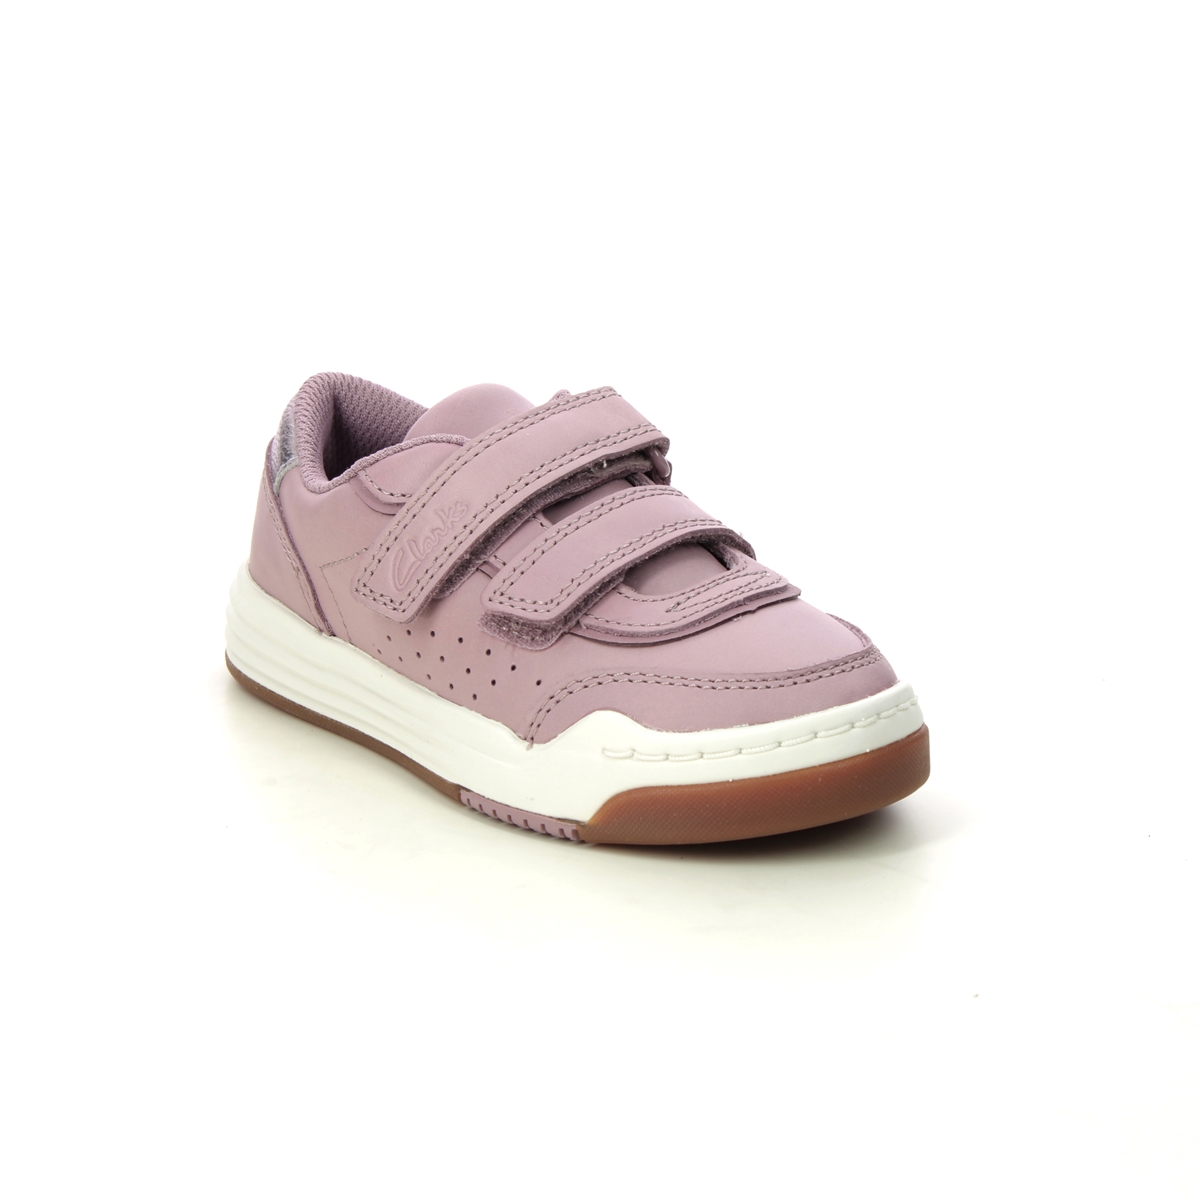 Clarks Urban Solo K Pink Leather Kids first shoes 7666-16F in a Plain Leather in Size 7.5